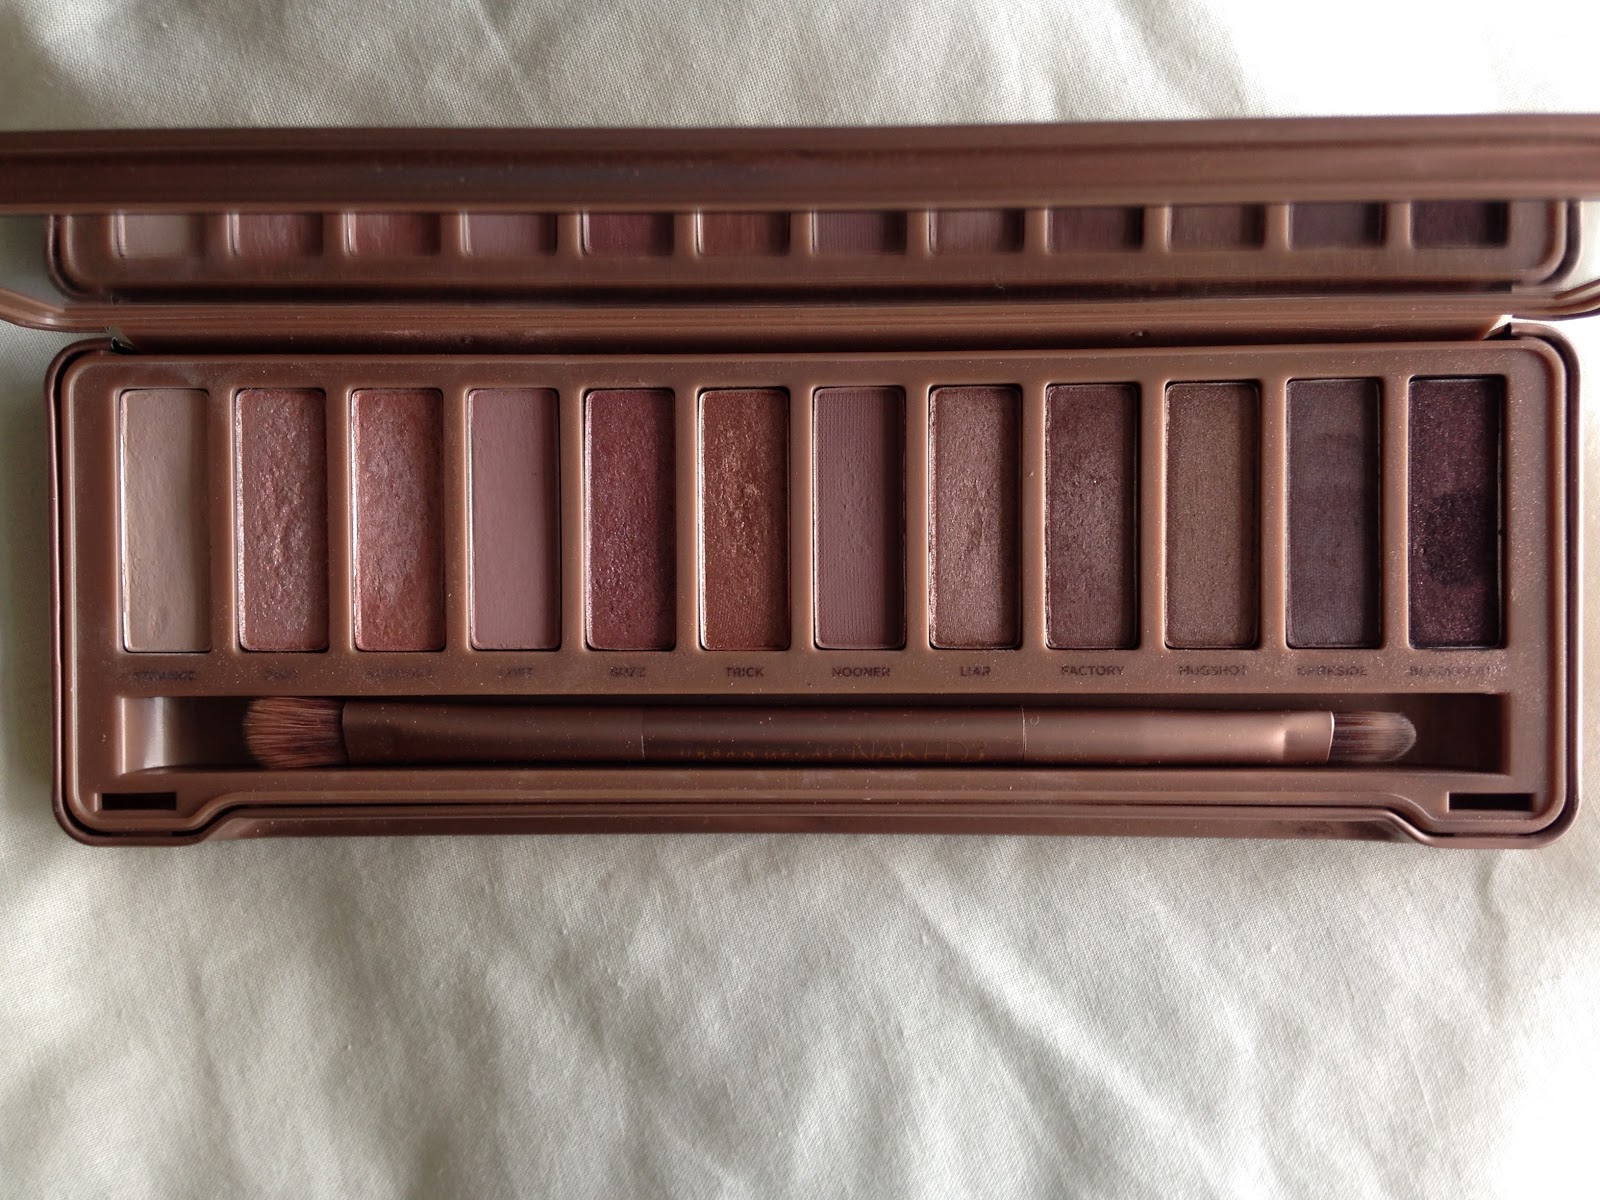 Urban Decay Naked 3 Palette Review, Photos, Swatches 